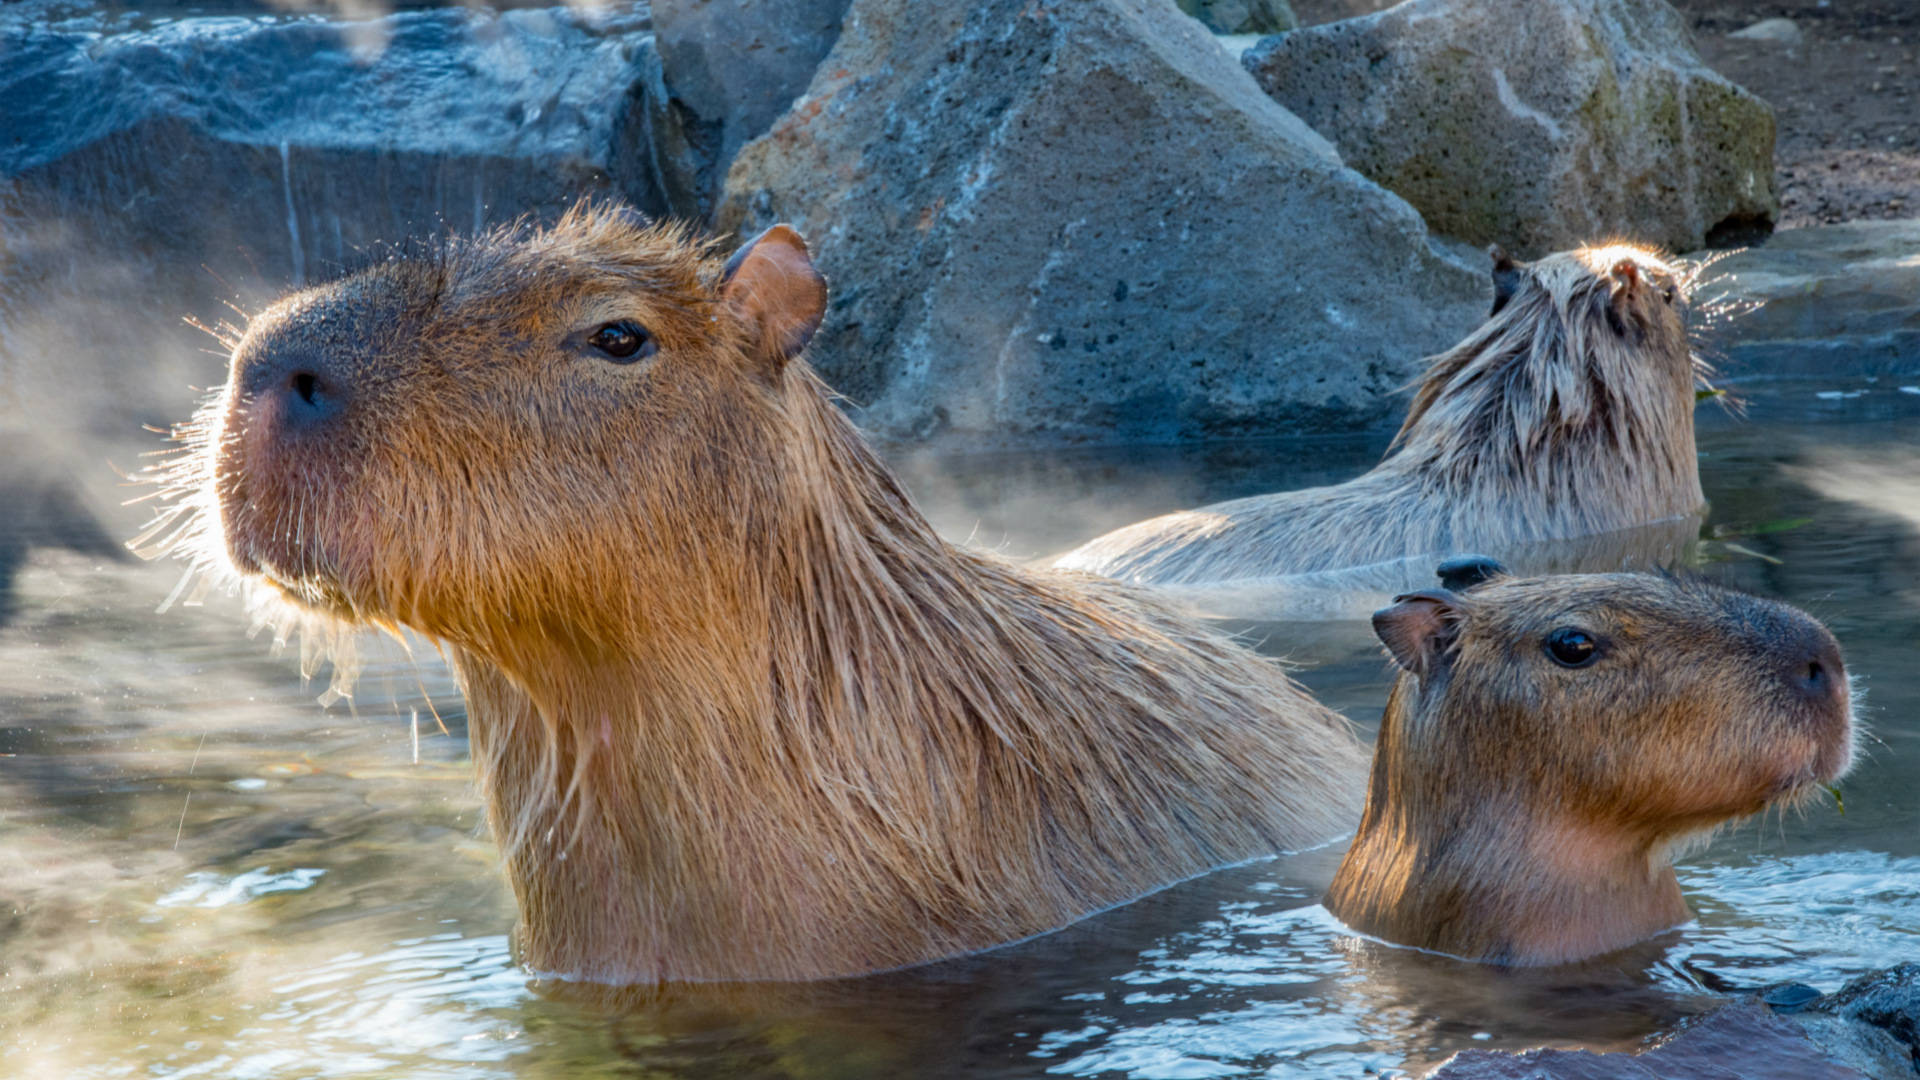 Soaked Capybara In The Water Background